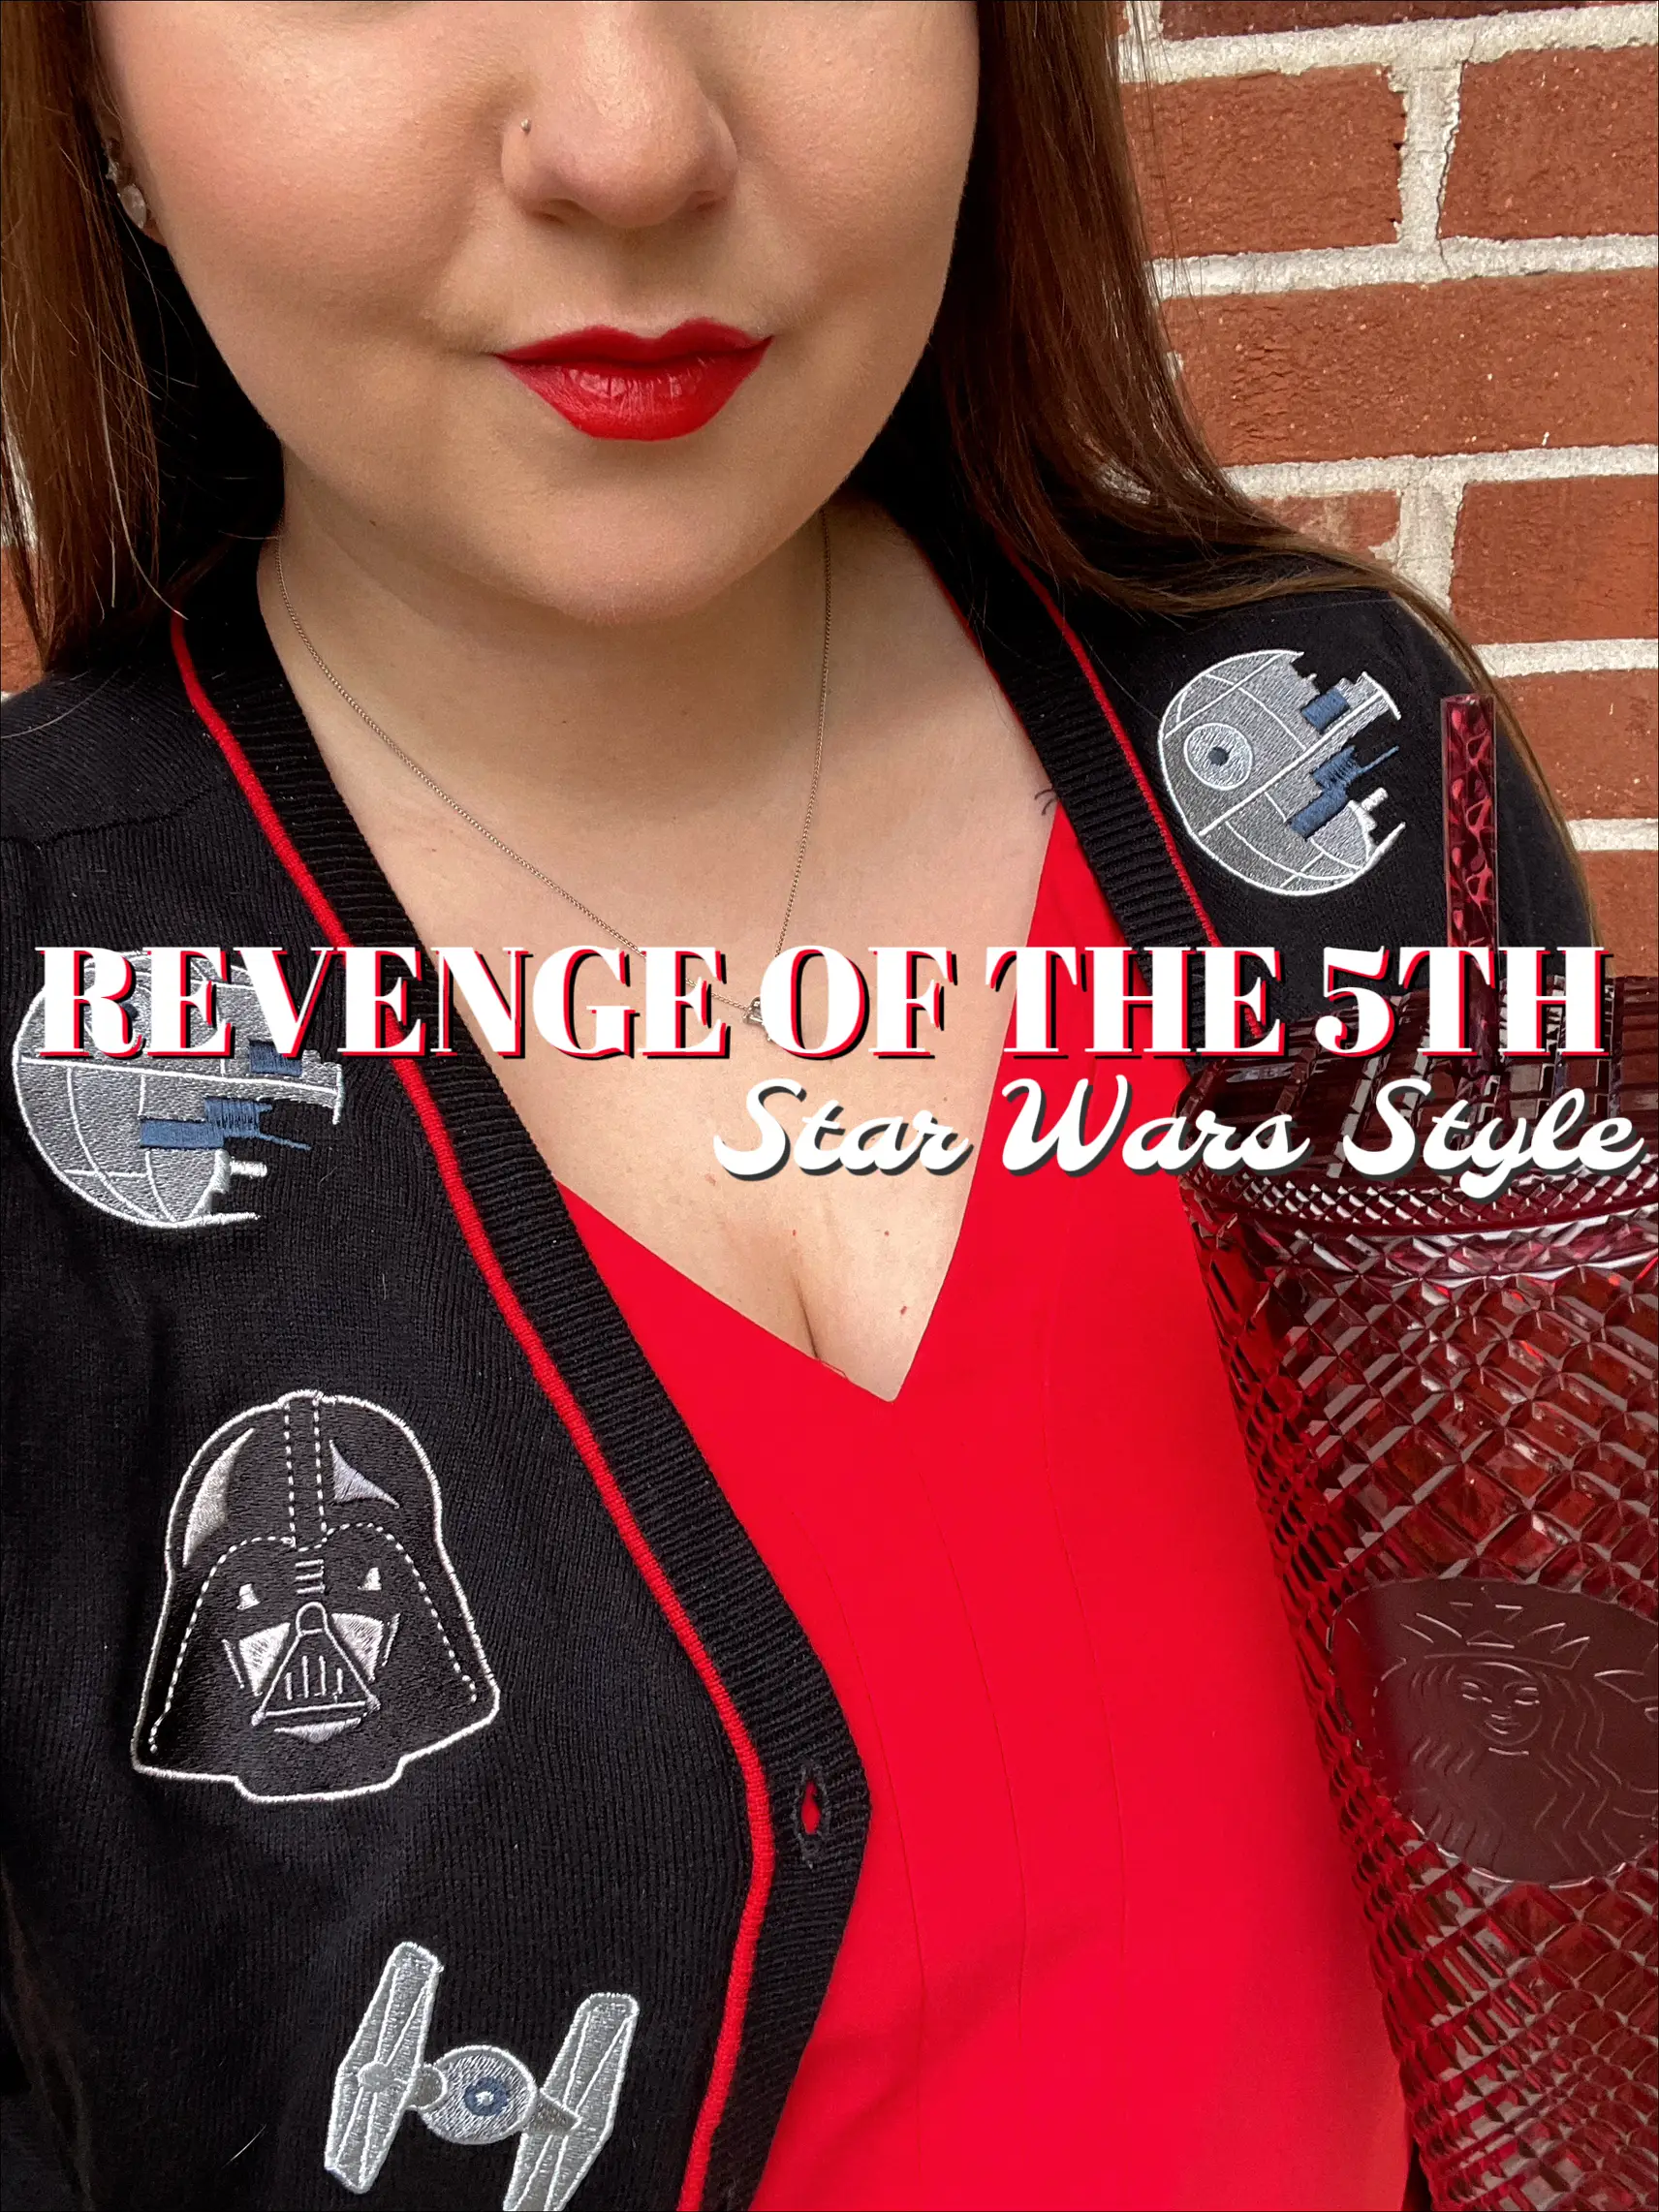 6 OUTFIT IDEAS FOR STAR WARS DAY (May 4th)